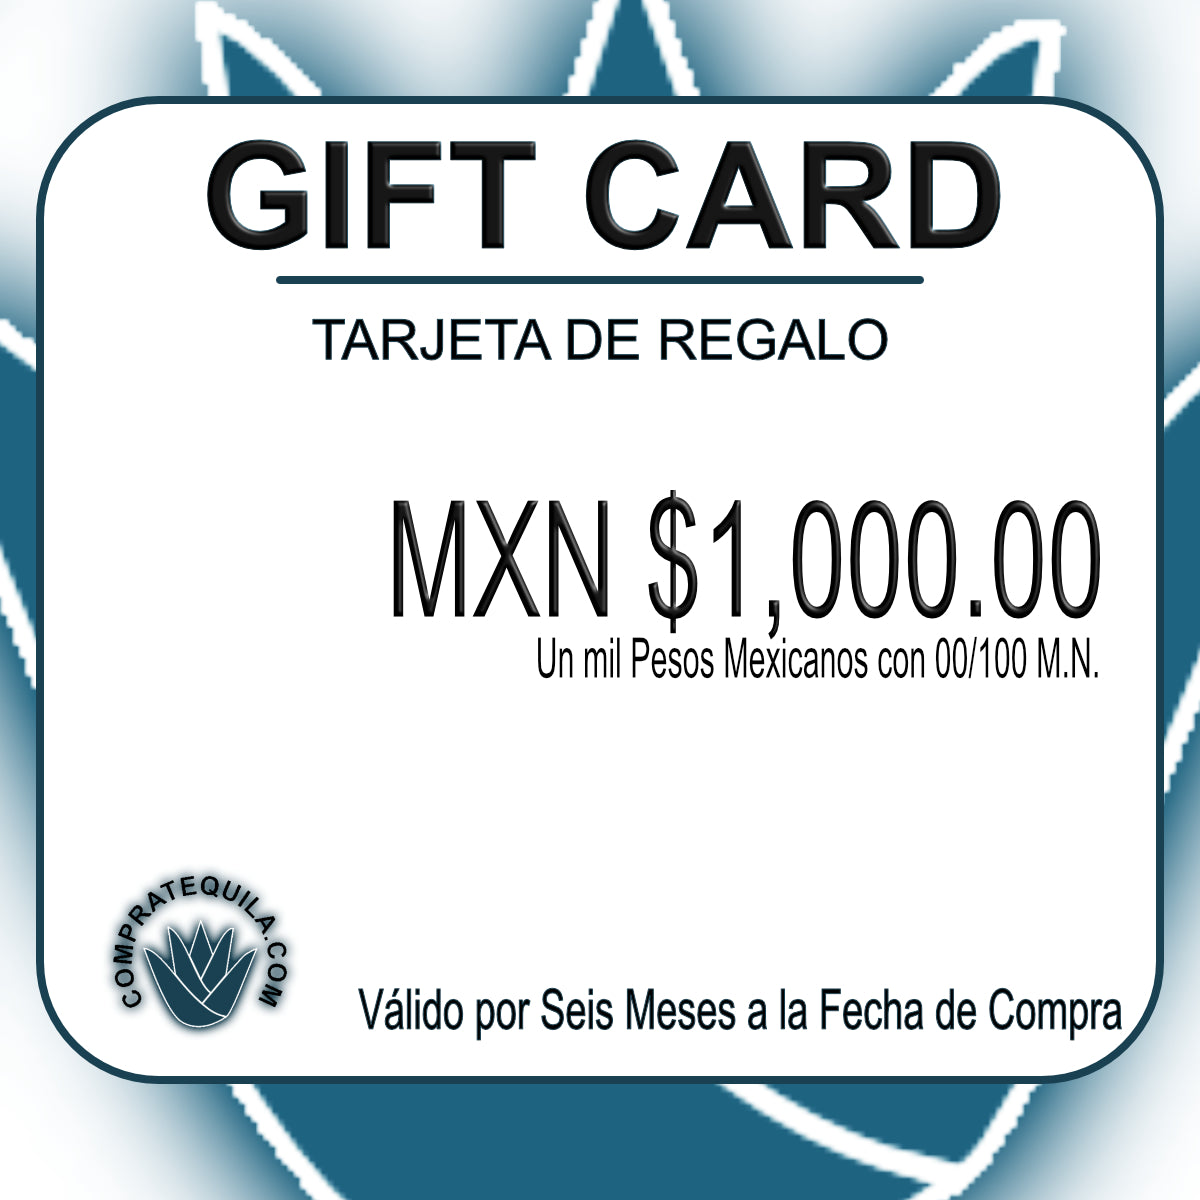 CompraTequila Gift Card: The Best Tequila Buying Experience and More